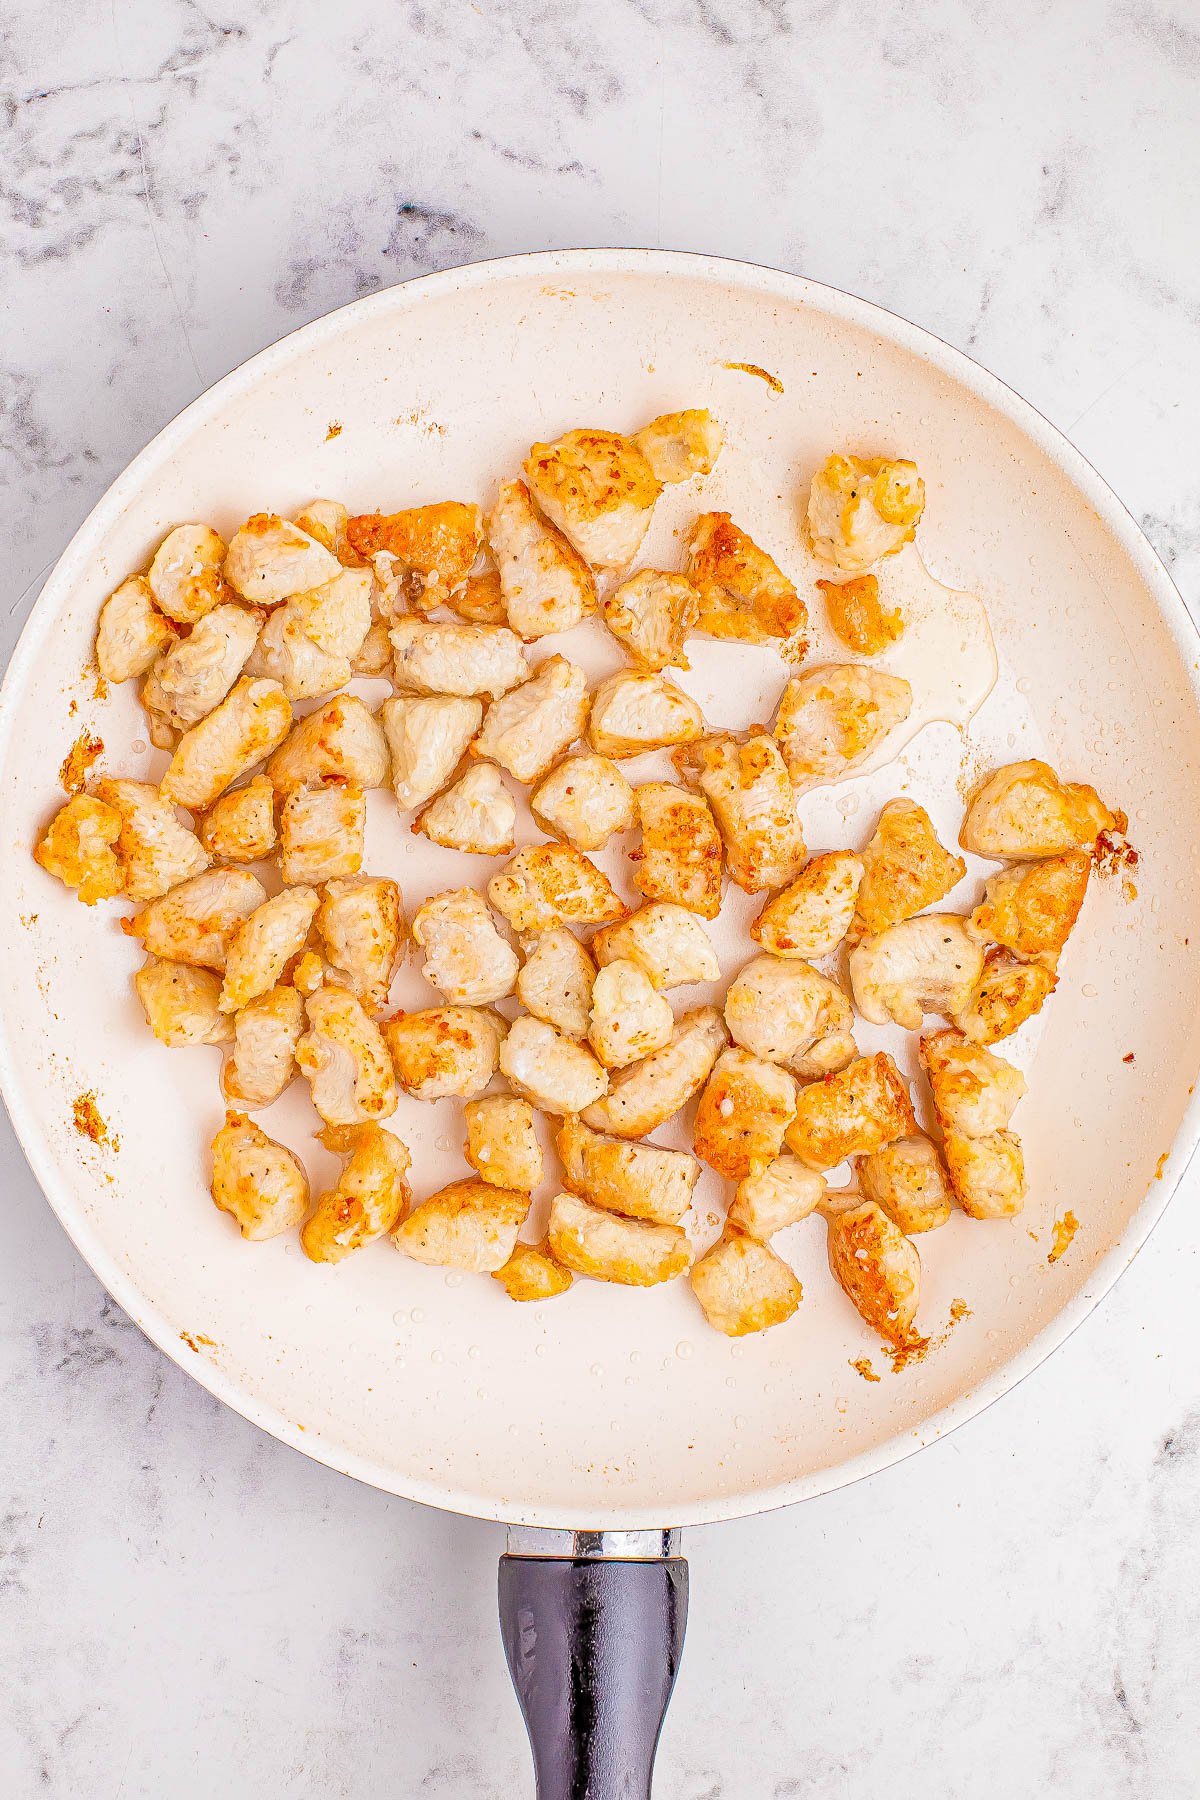 Cooked chicken pieces in a white frying pan on a marble surface.